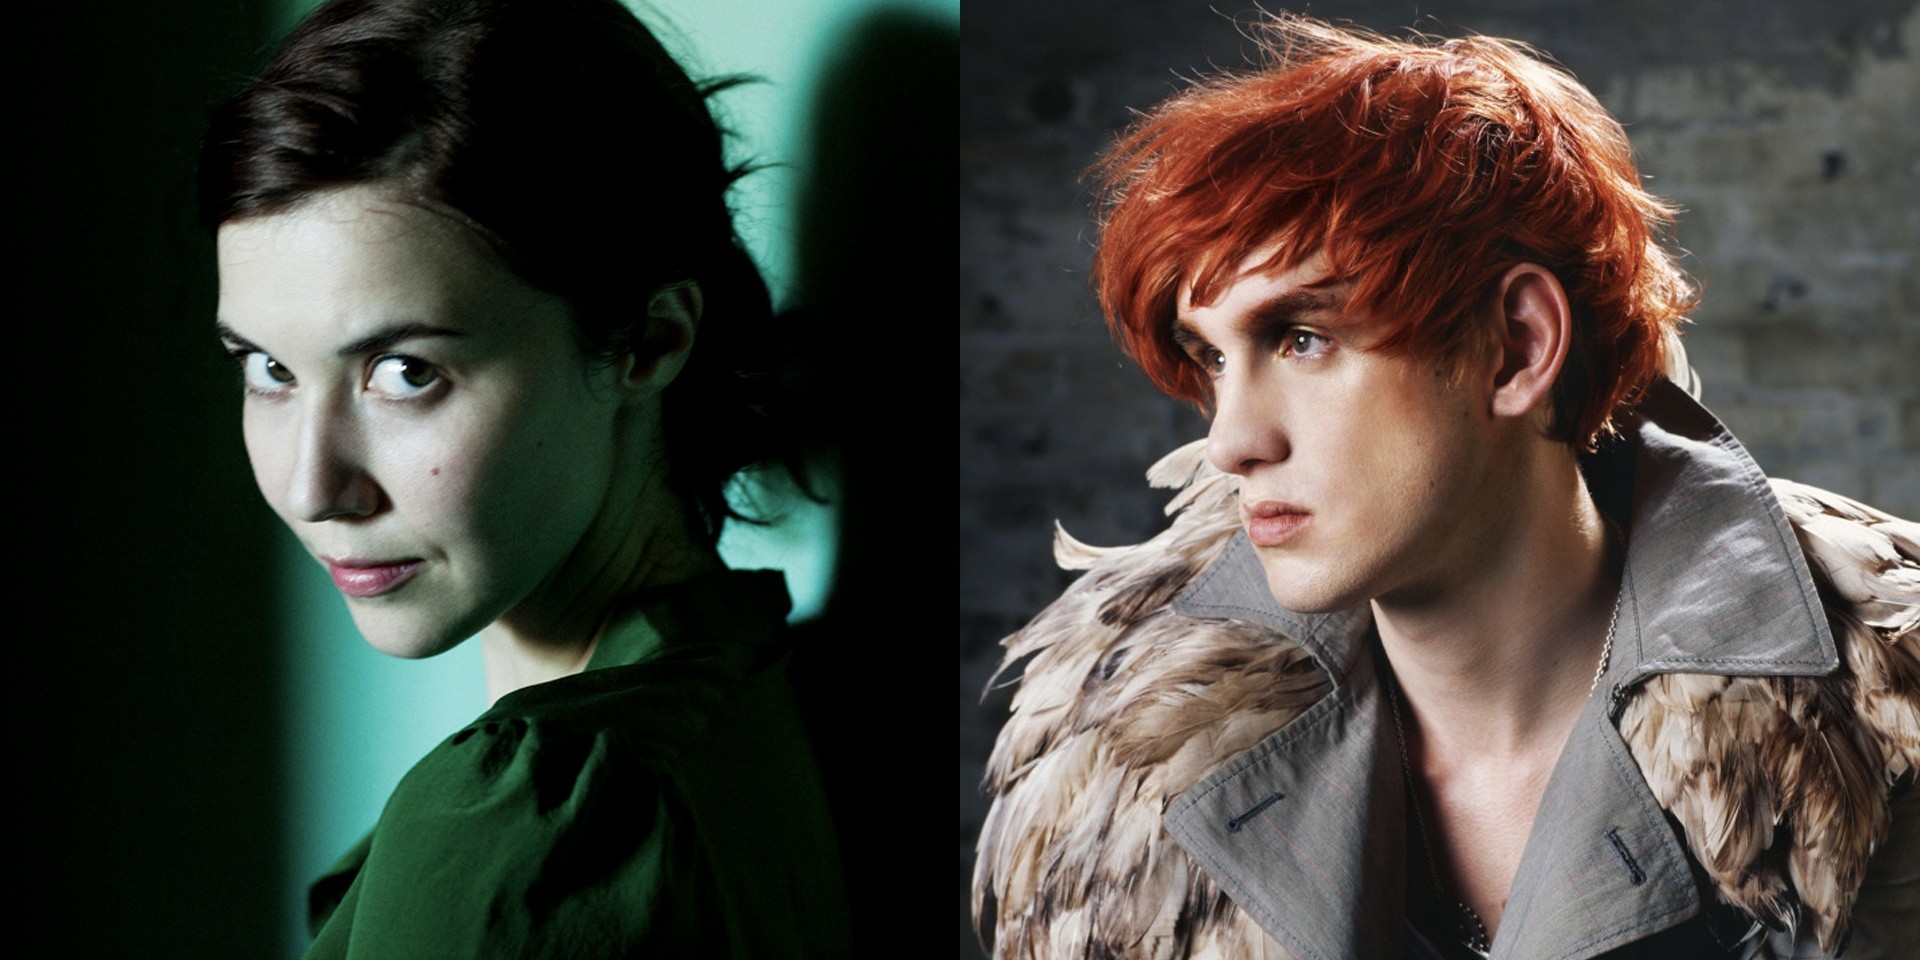 Patrick Wolf & Lisa Hannigan, Hiromi The Trio Project, and TOMGIRL confirmed for the Esplanande's rebooted Mosaic Music Weekend 